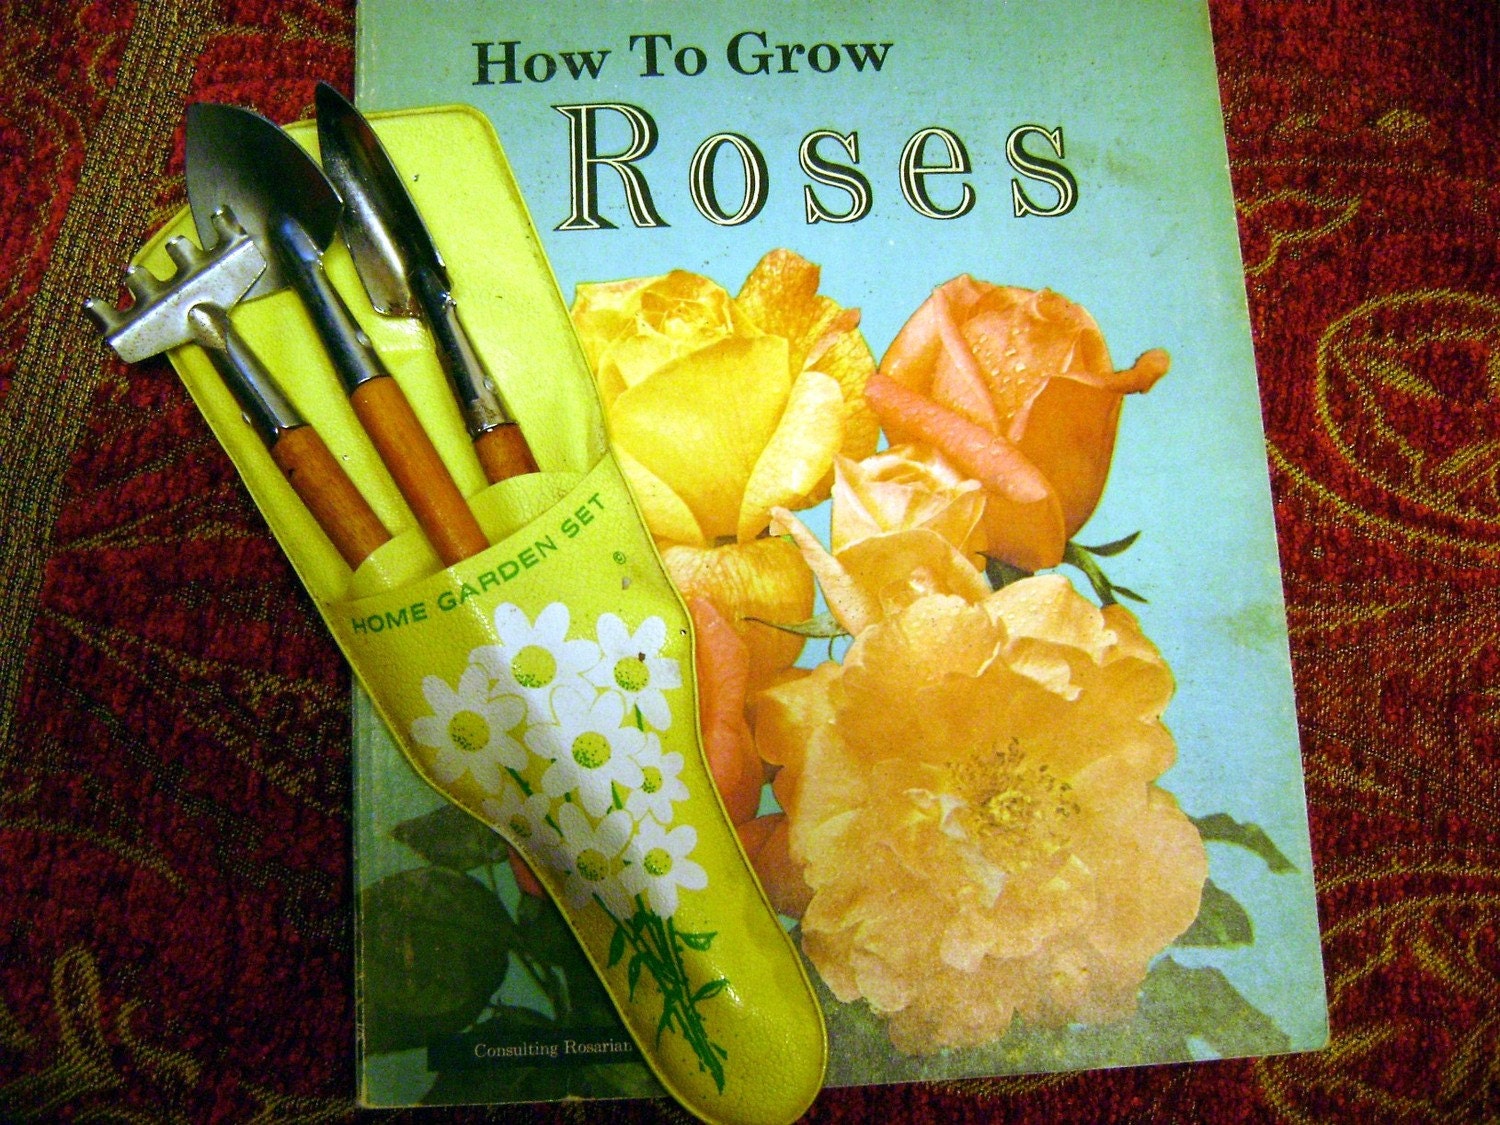 How to Grow Roses Sunset Book first edition and vintage garden tools  Spring Sale